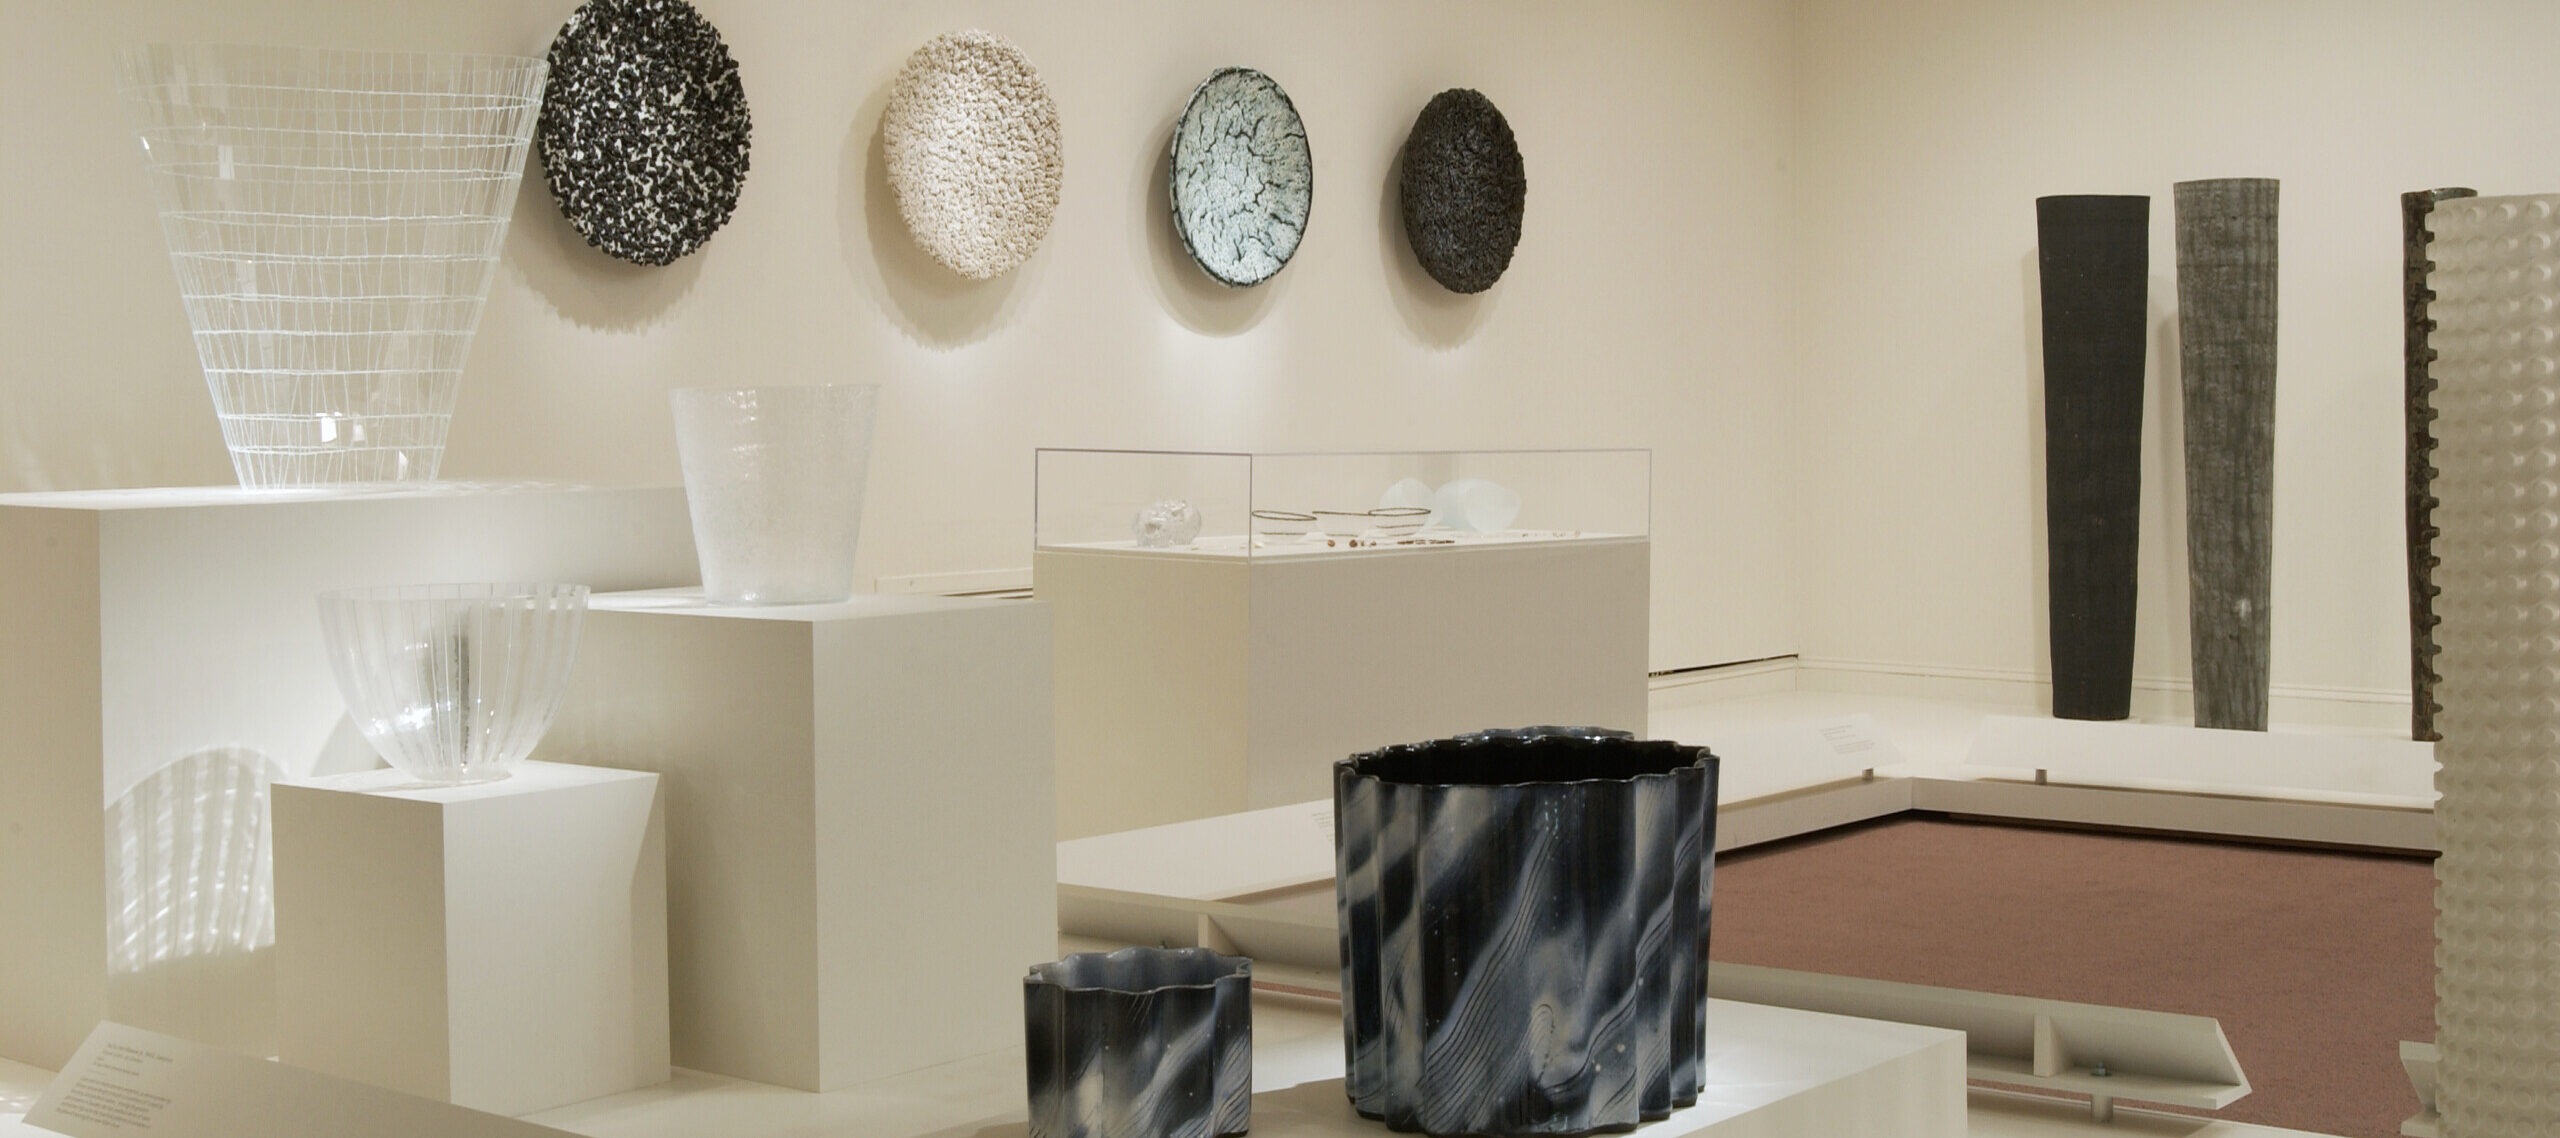 Installation view of a gallery space with white walls and white pedestals. There are several art works on the pedestals, including glass bowls. Several black and gray bowls hang on the wall, as well as some textile art pieces in dark colors.